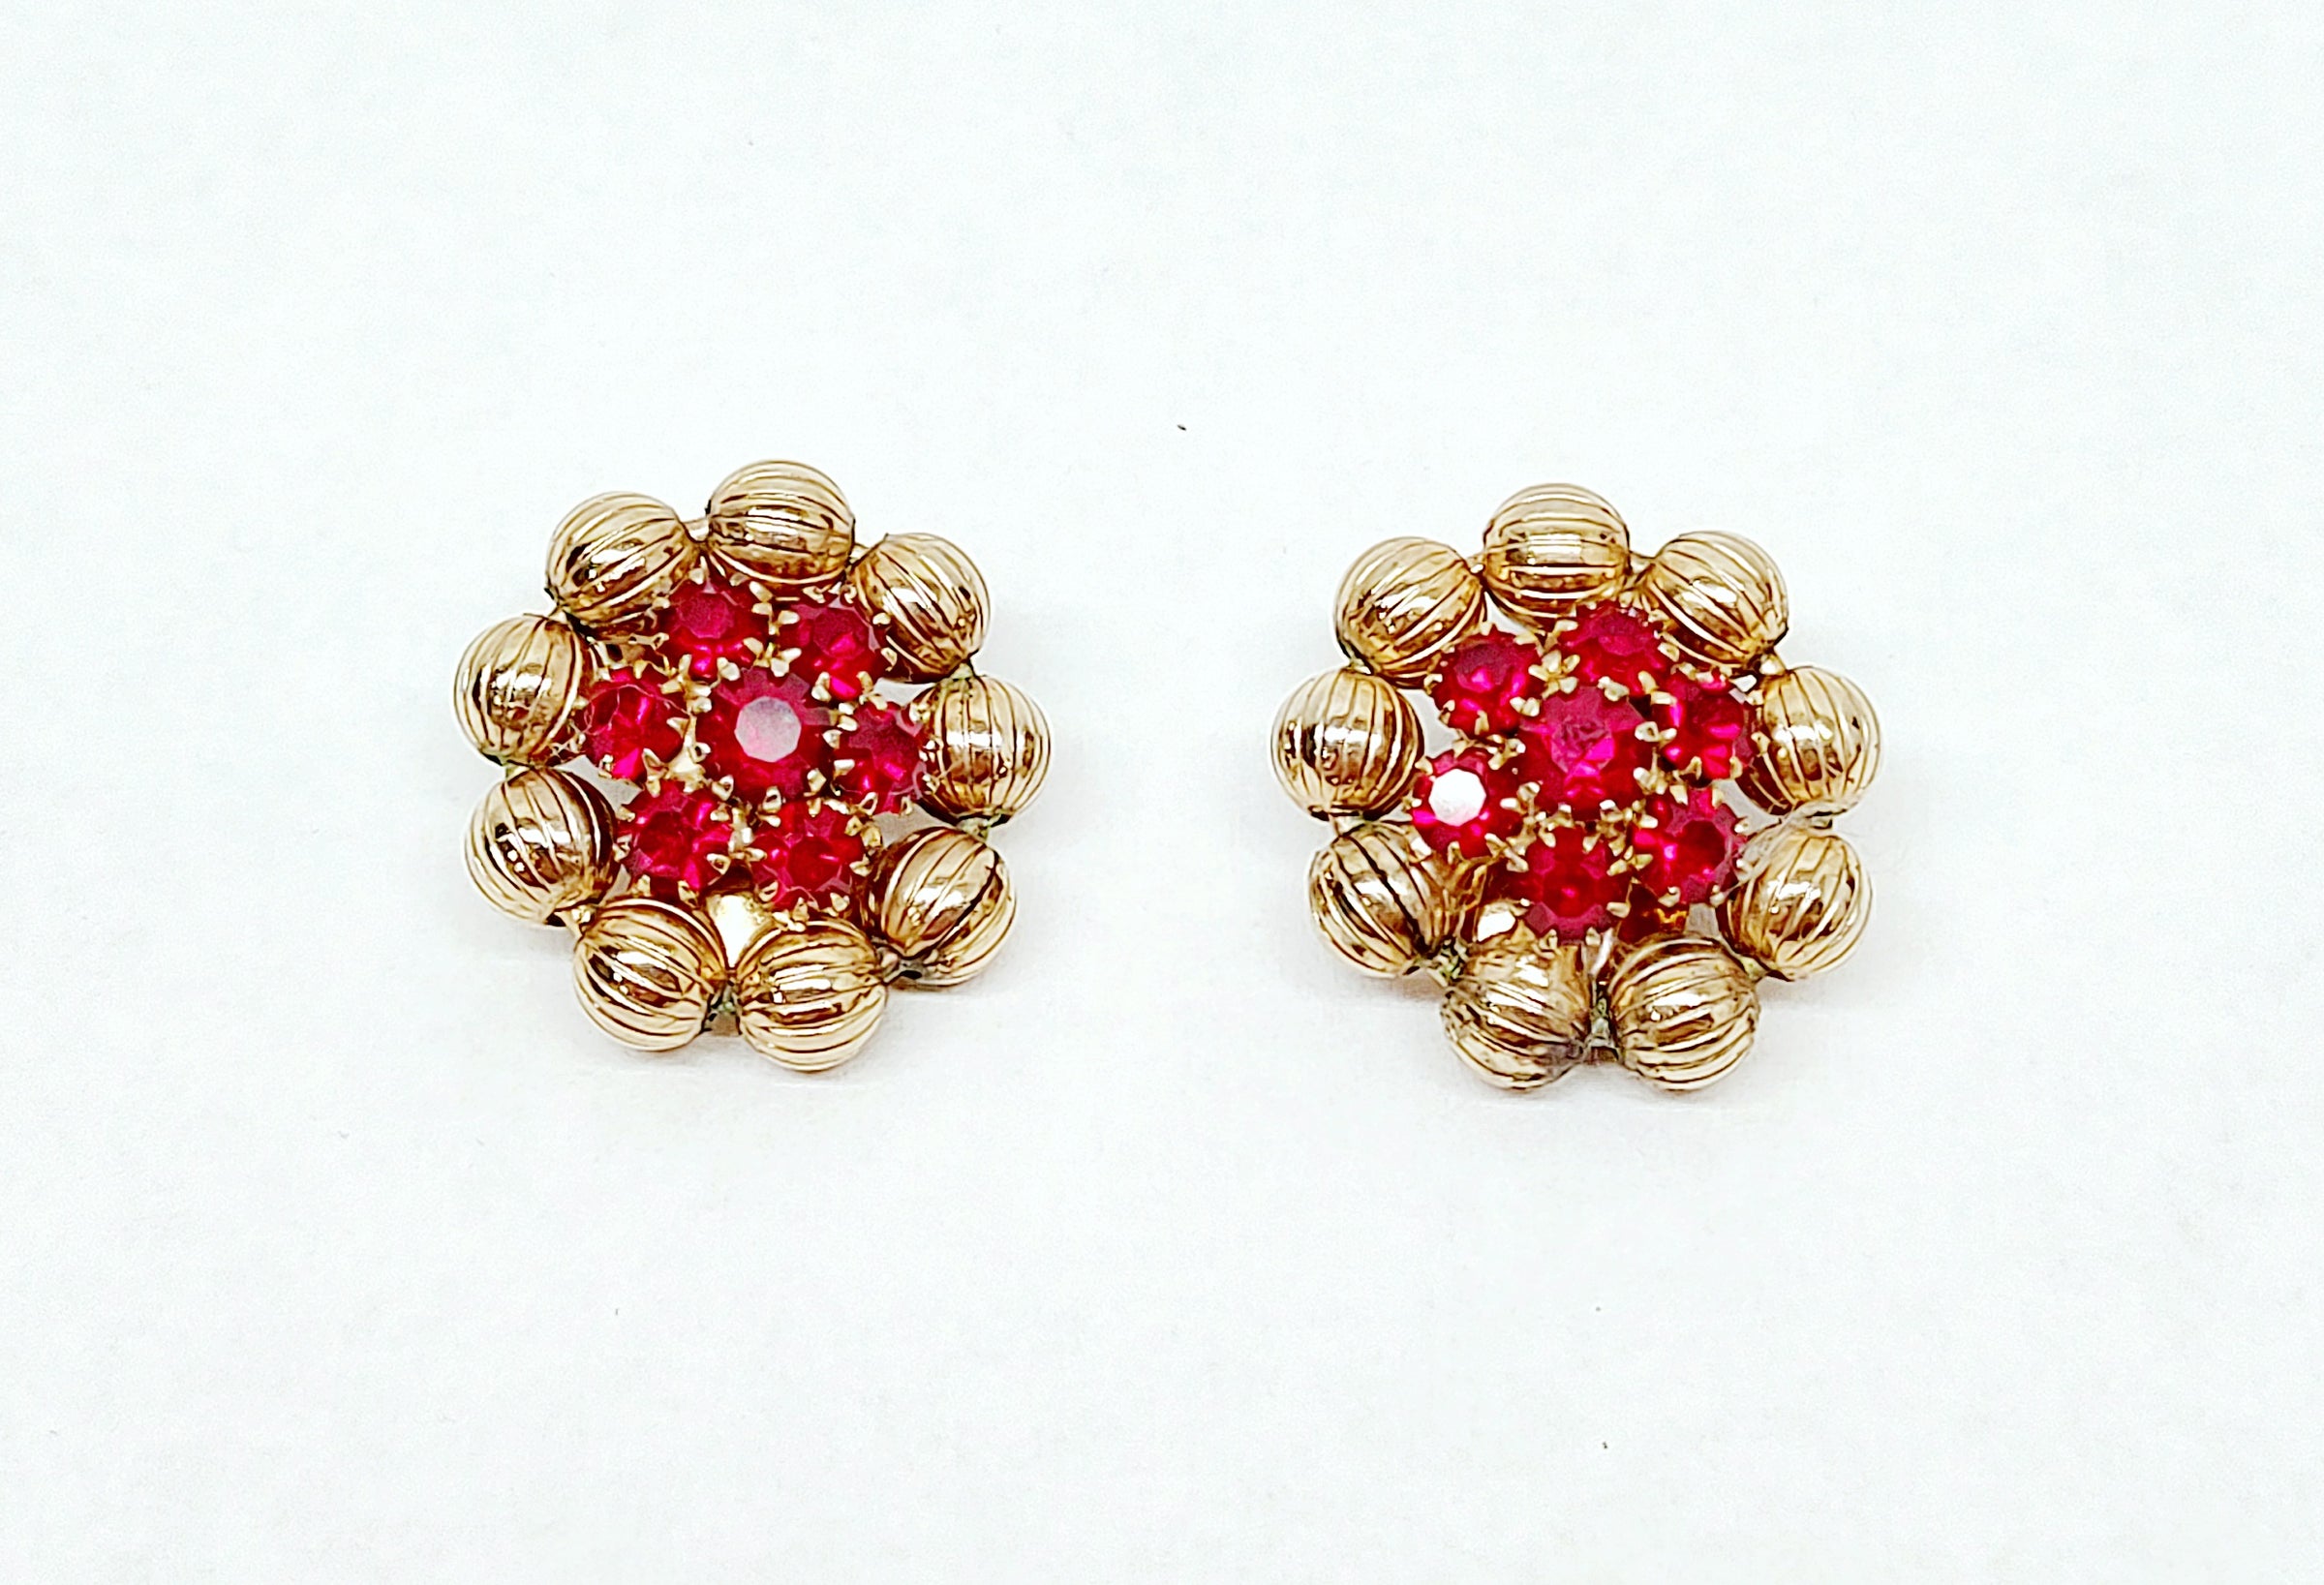 Weiss Round Gold Tone Ball and Red Rhinestone Clip-On Earrings - Hers and His Treasures